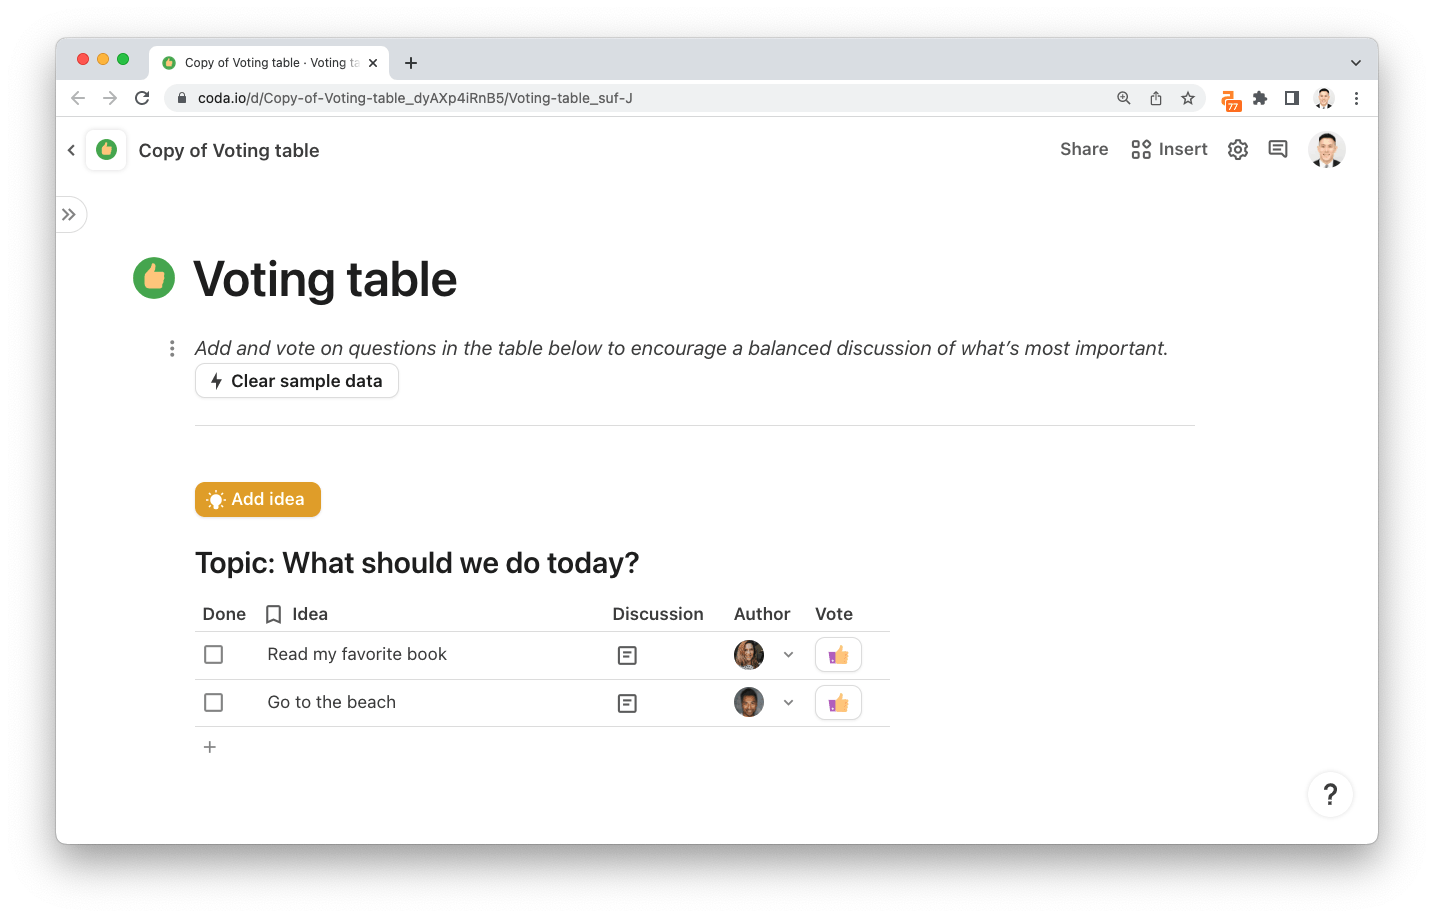 Free meeting poll template with a built-in voting table - ask your teammates to add ideas, topics, or agenda items and vote